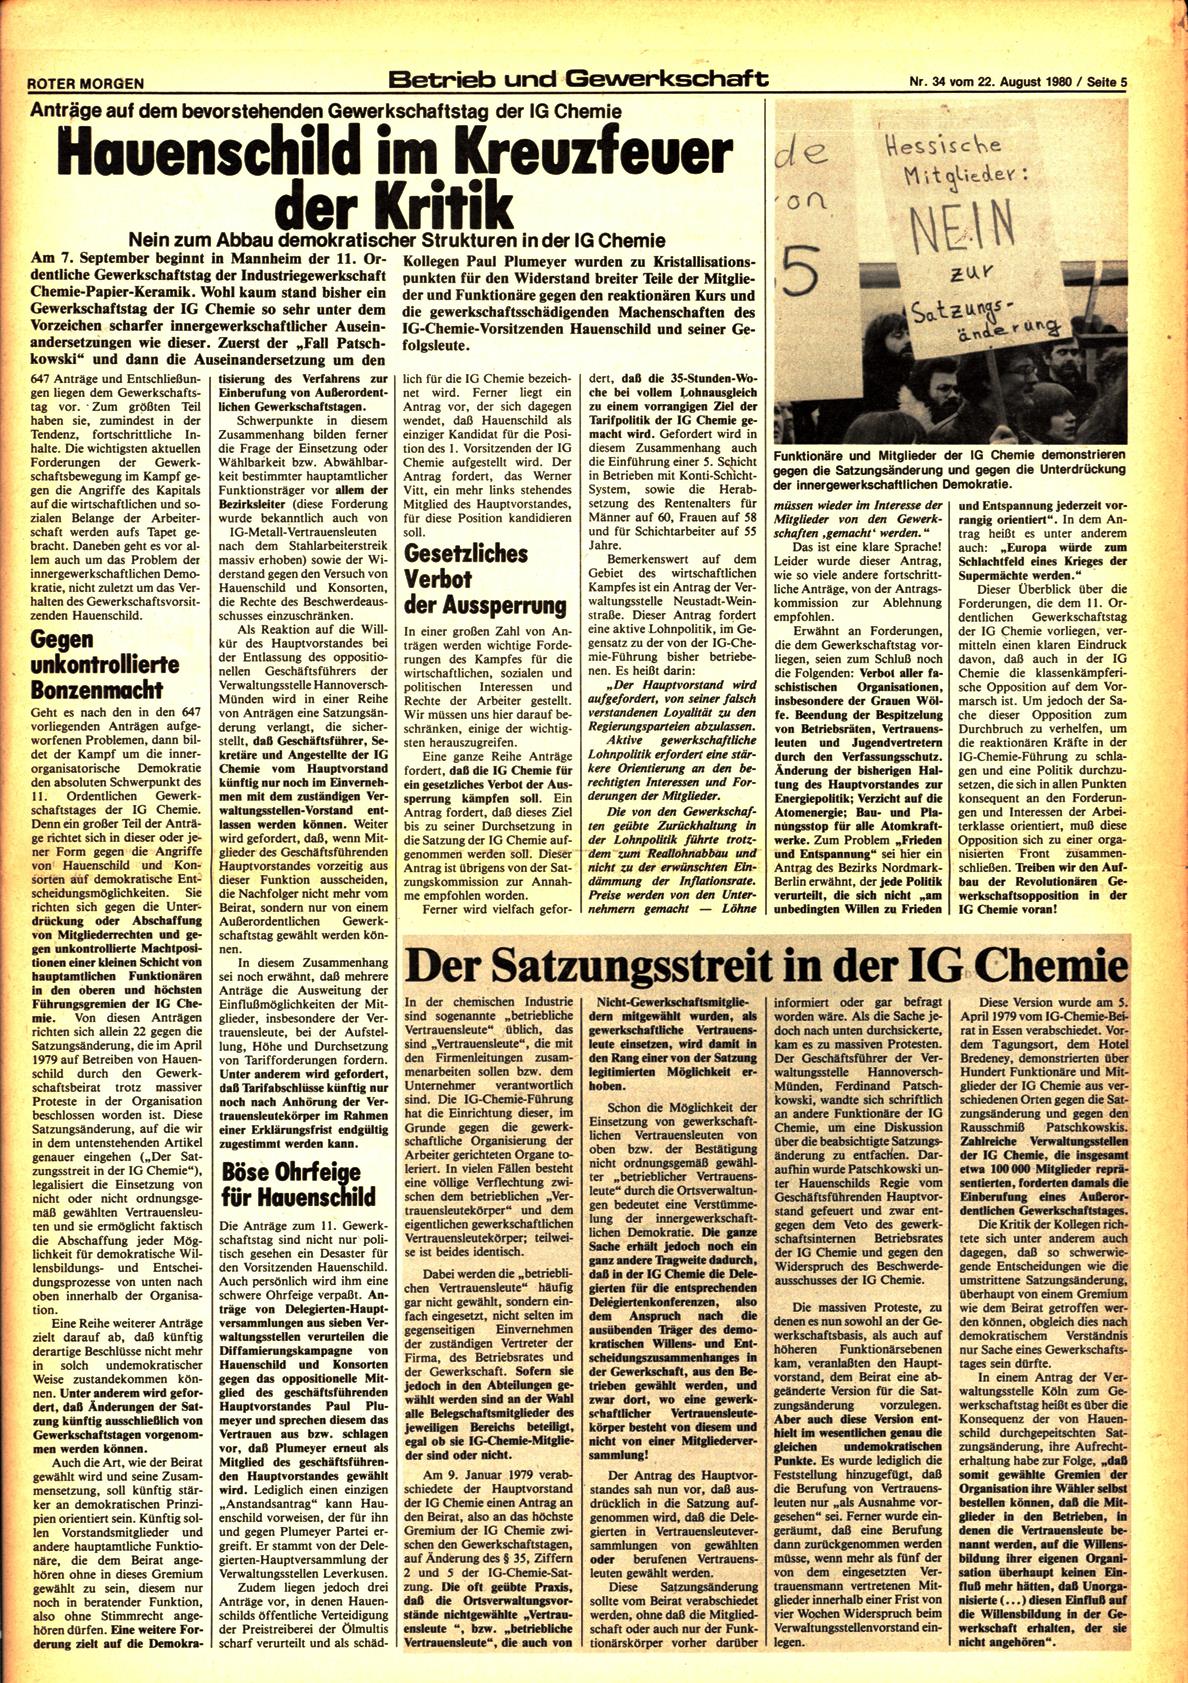 Roter Morgen, 14. Jg., 22. August 1980, Nr. 34, Seite 5